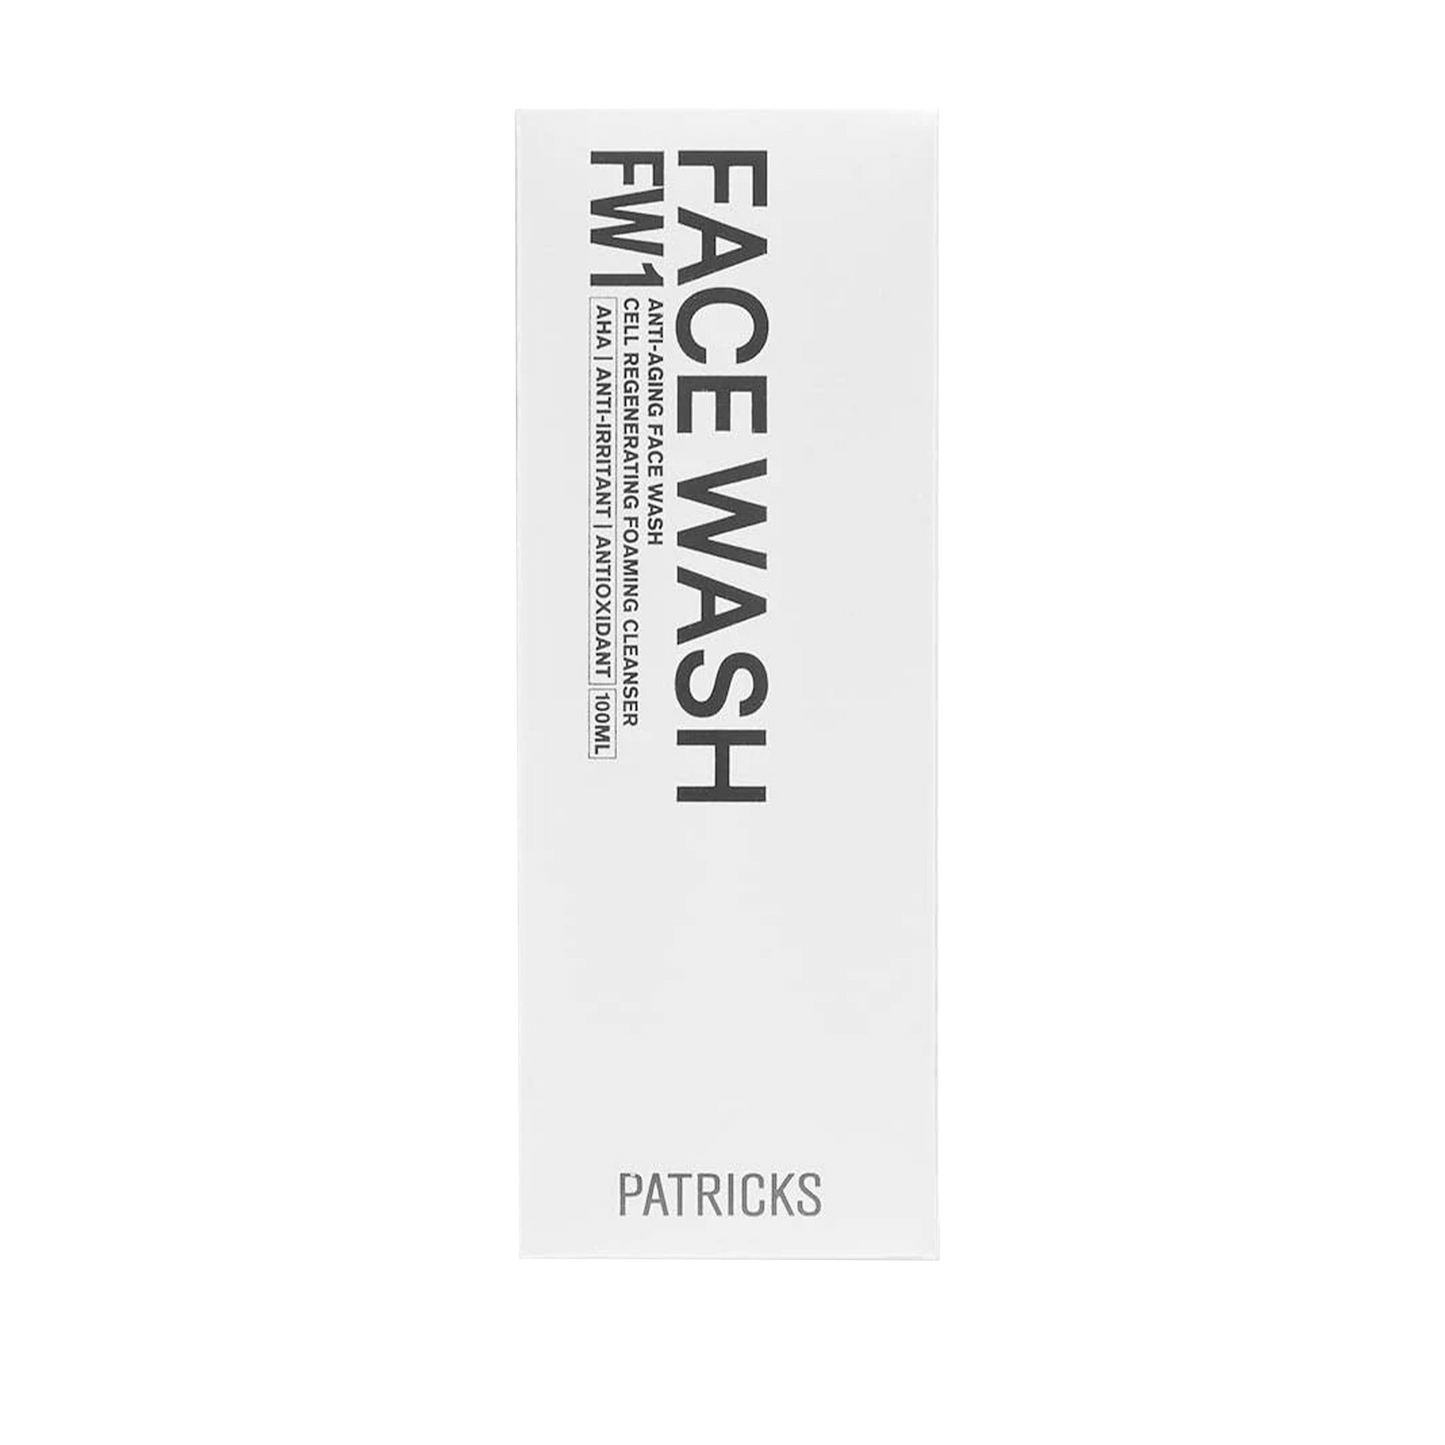 FW1 Face Wash | Cell Regenerating Foaming Cleanser